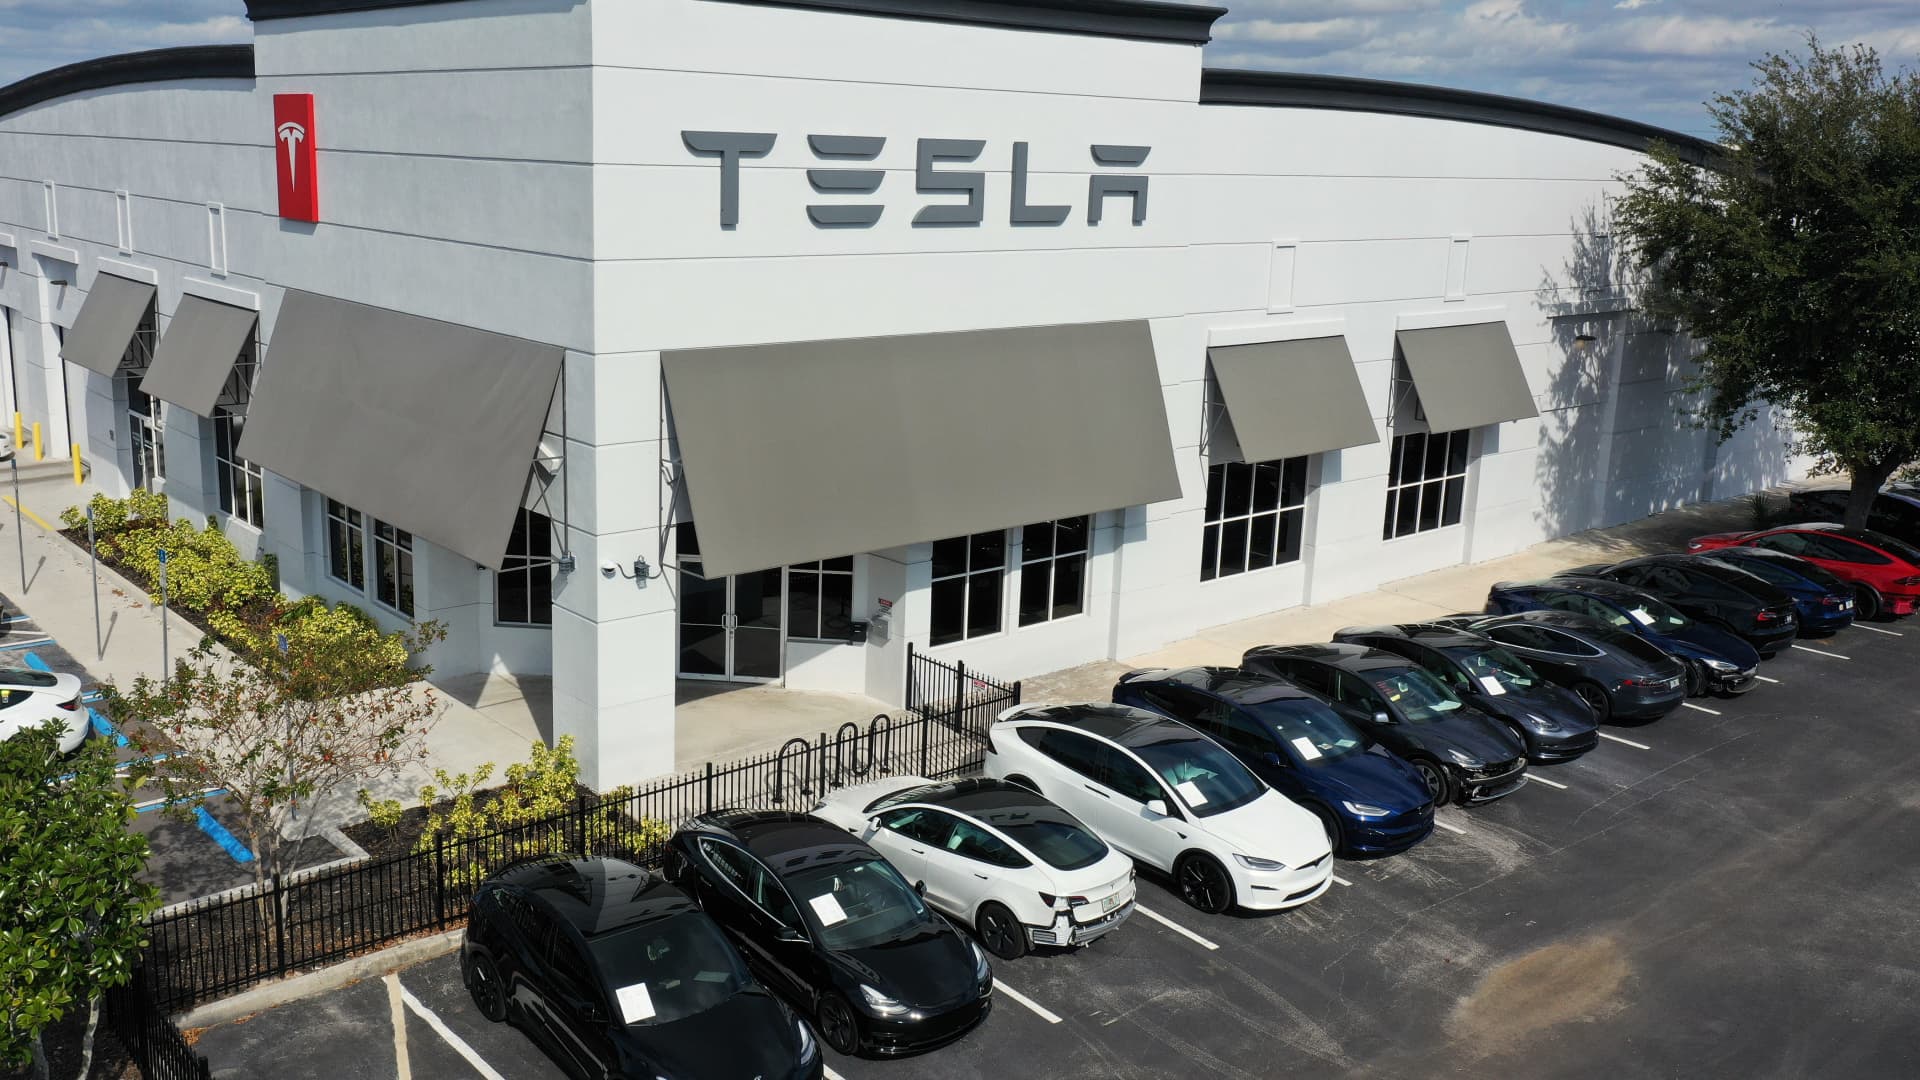 Tesla started electric vehicle price war, an opportunity for investors